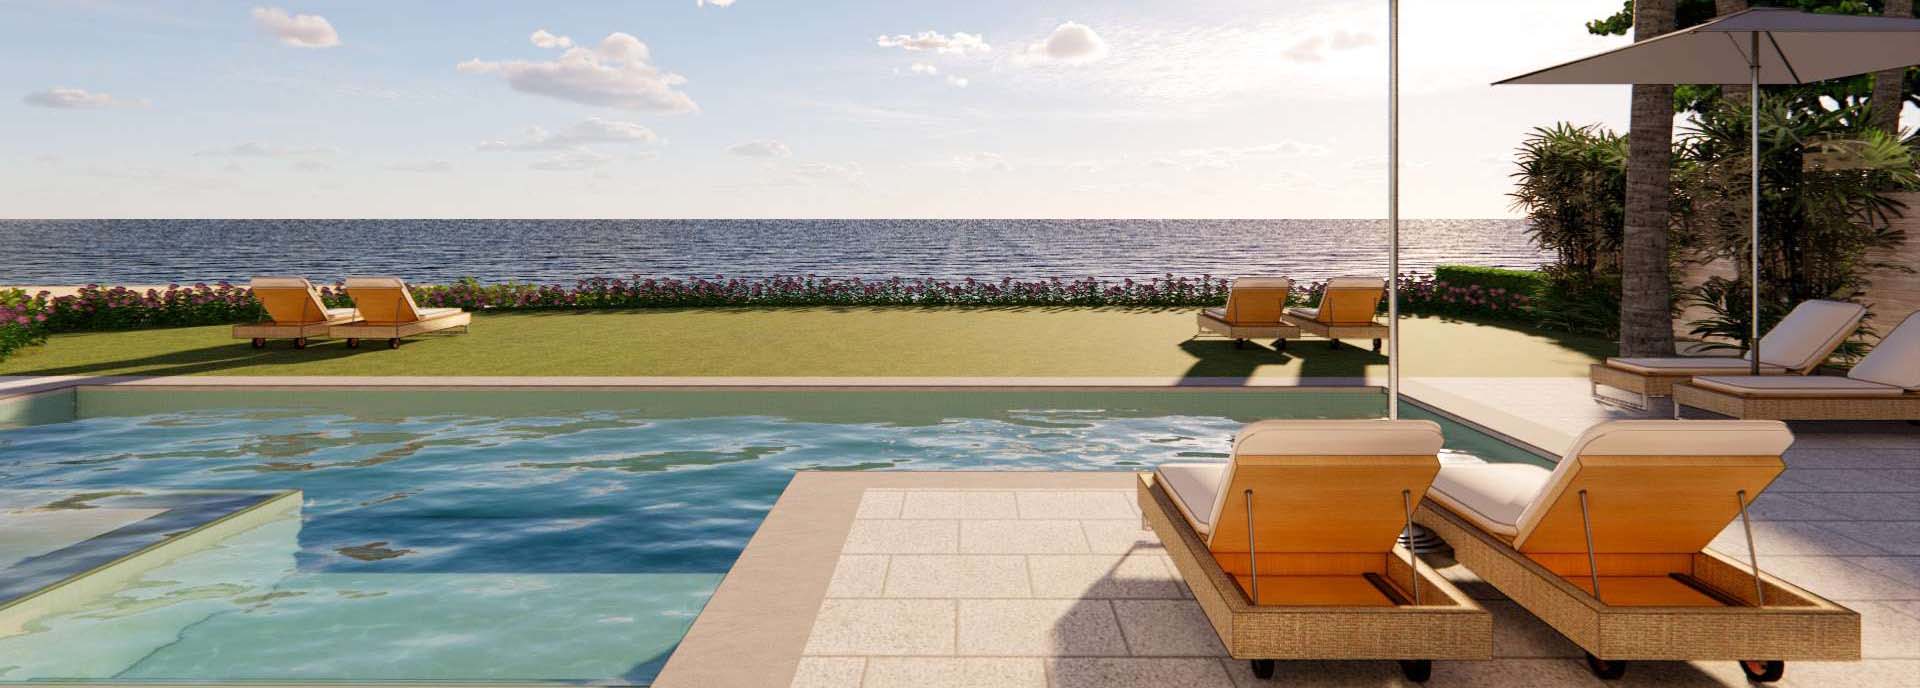 Naples Beach Club elevated poolside view